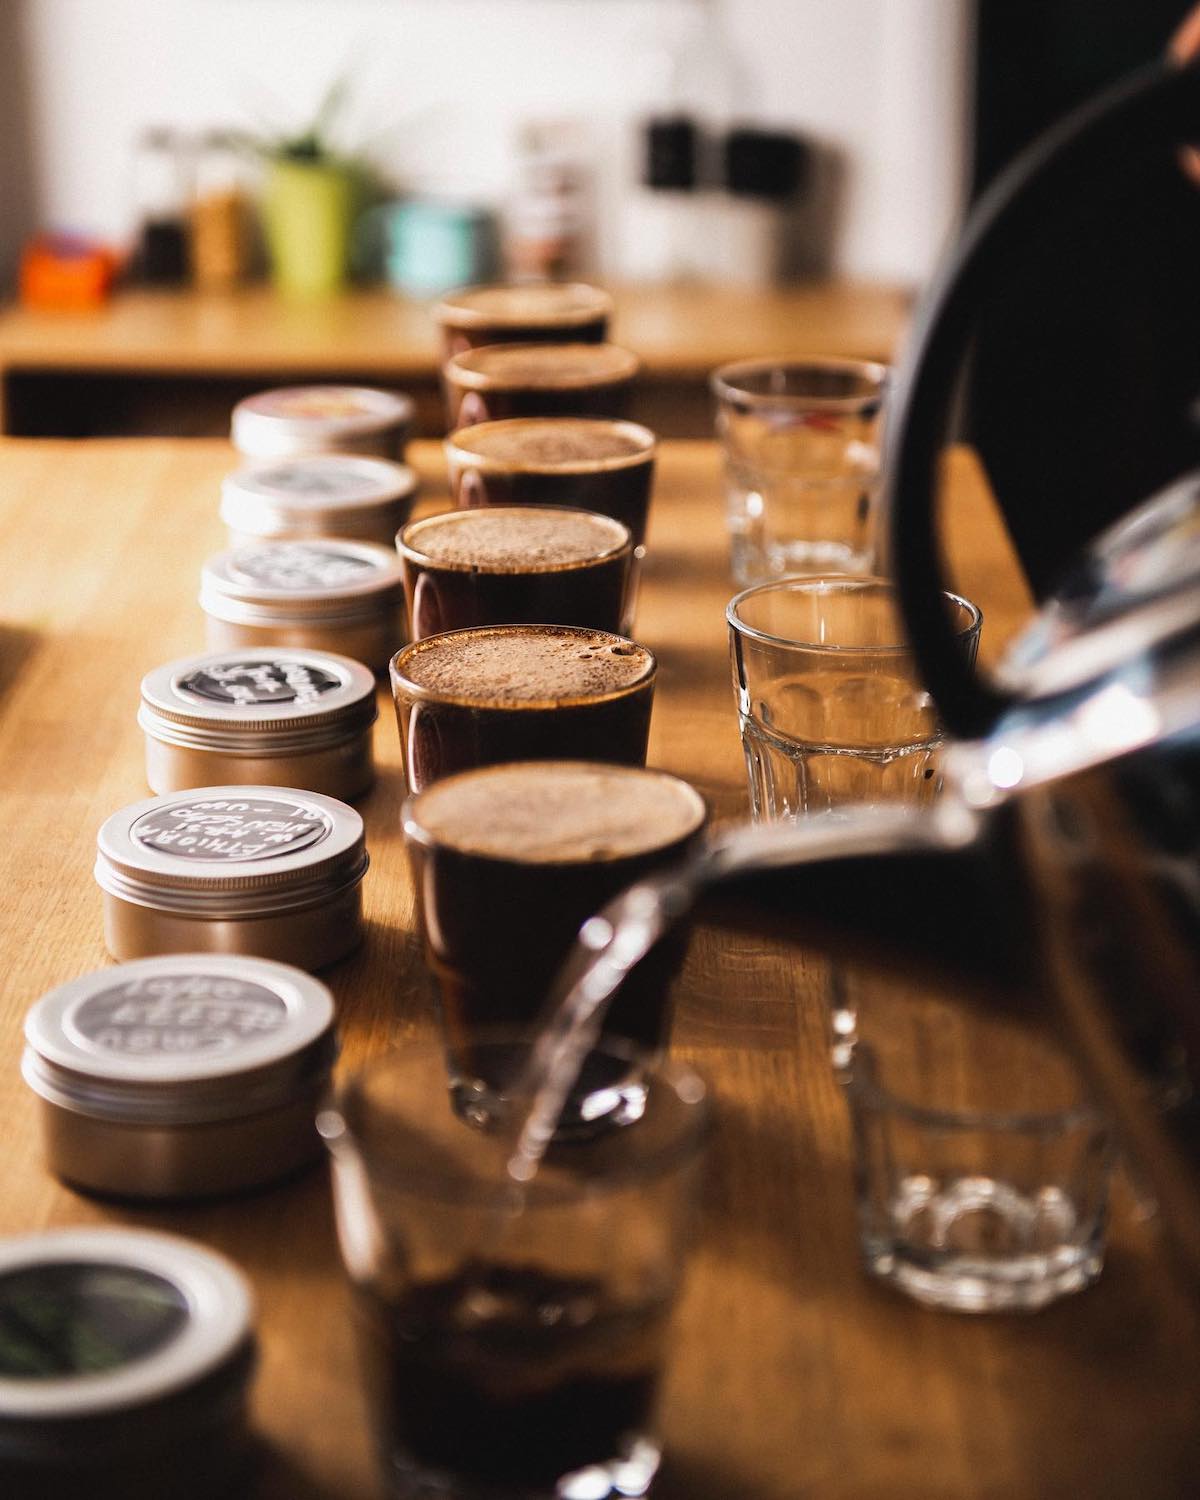 A cup of coffee beans being filled up with water, in line on a wooden table with other full cups, ready for a coffee cupping session.